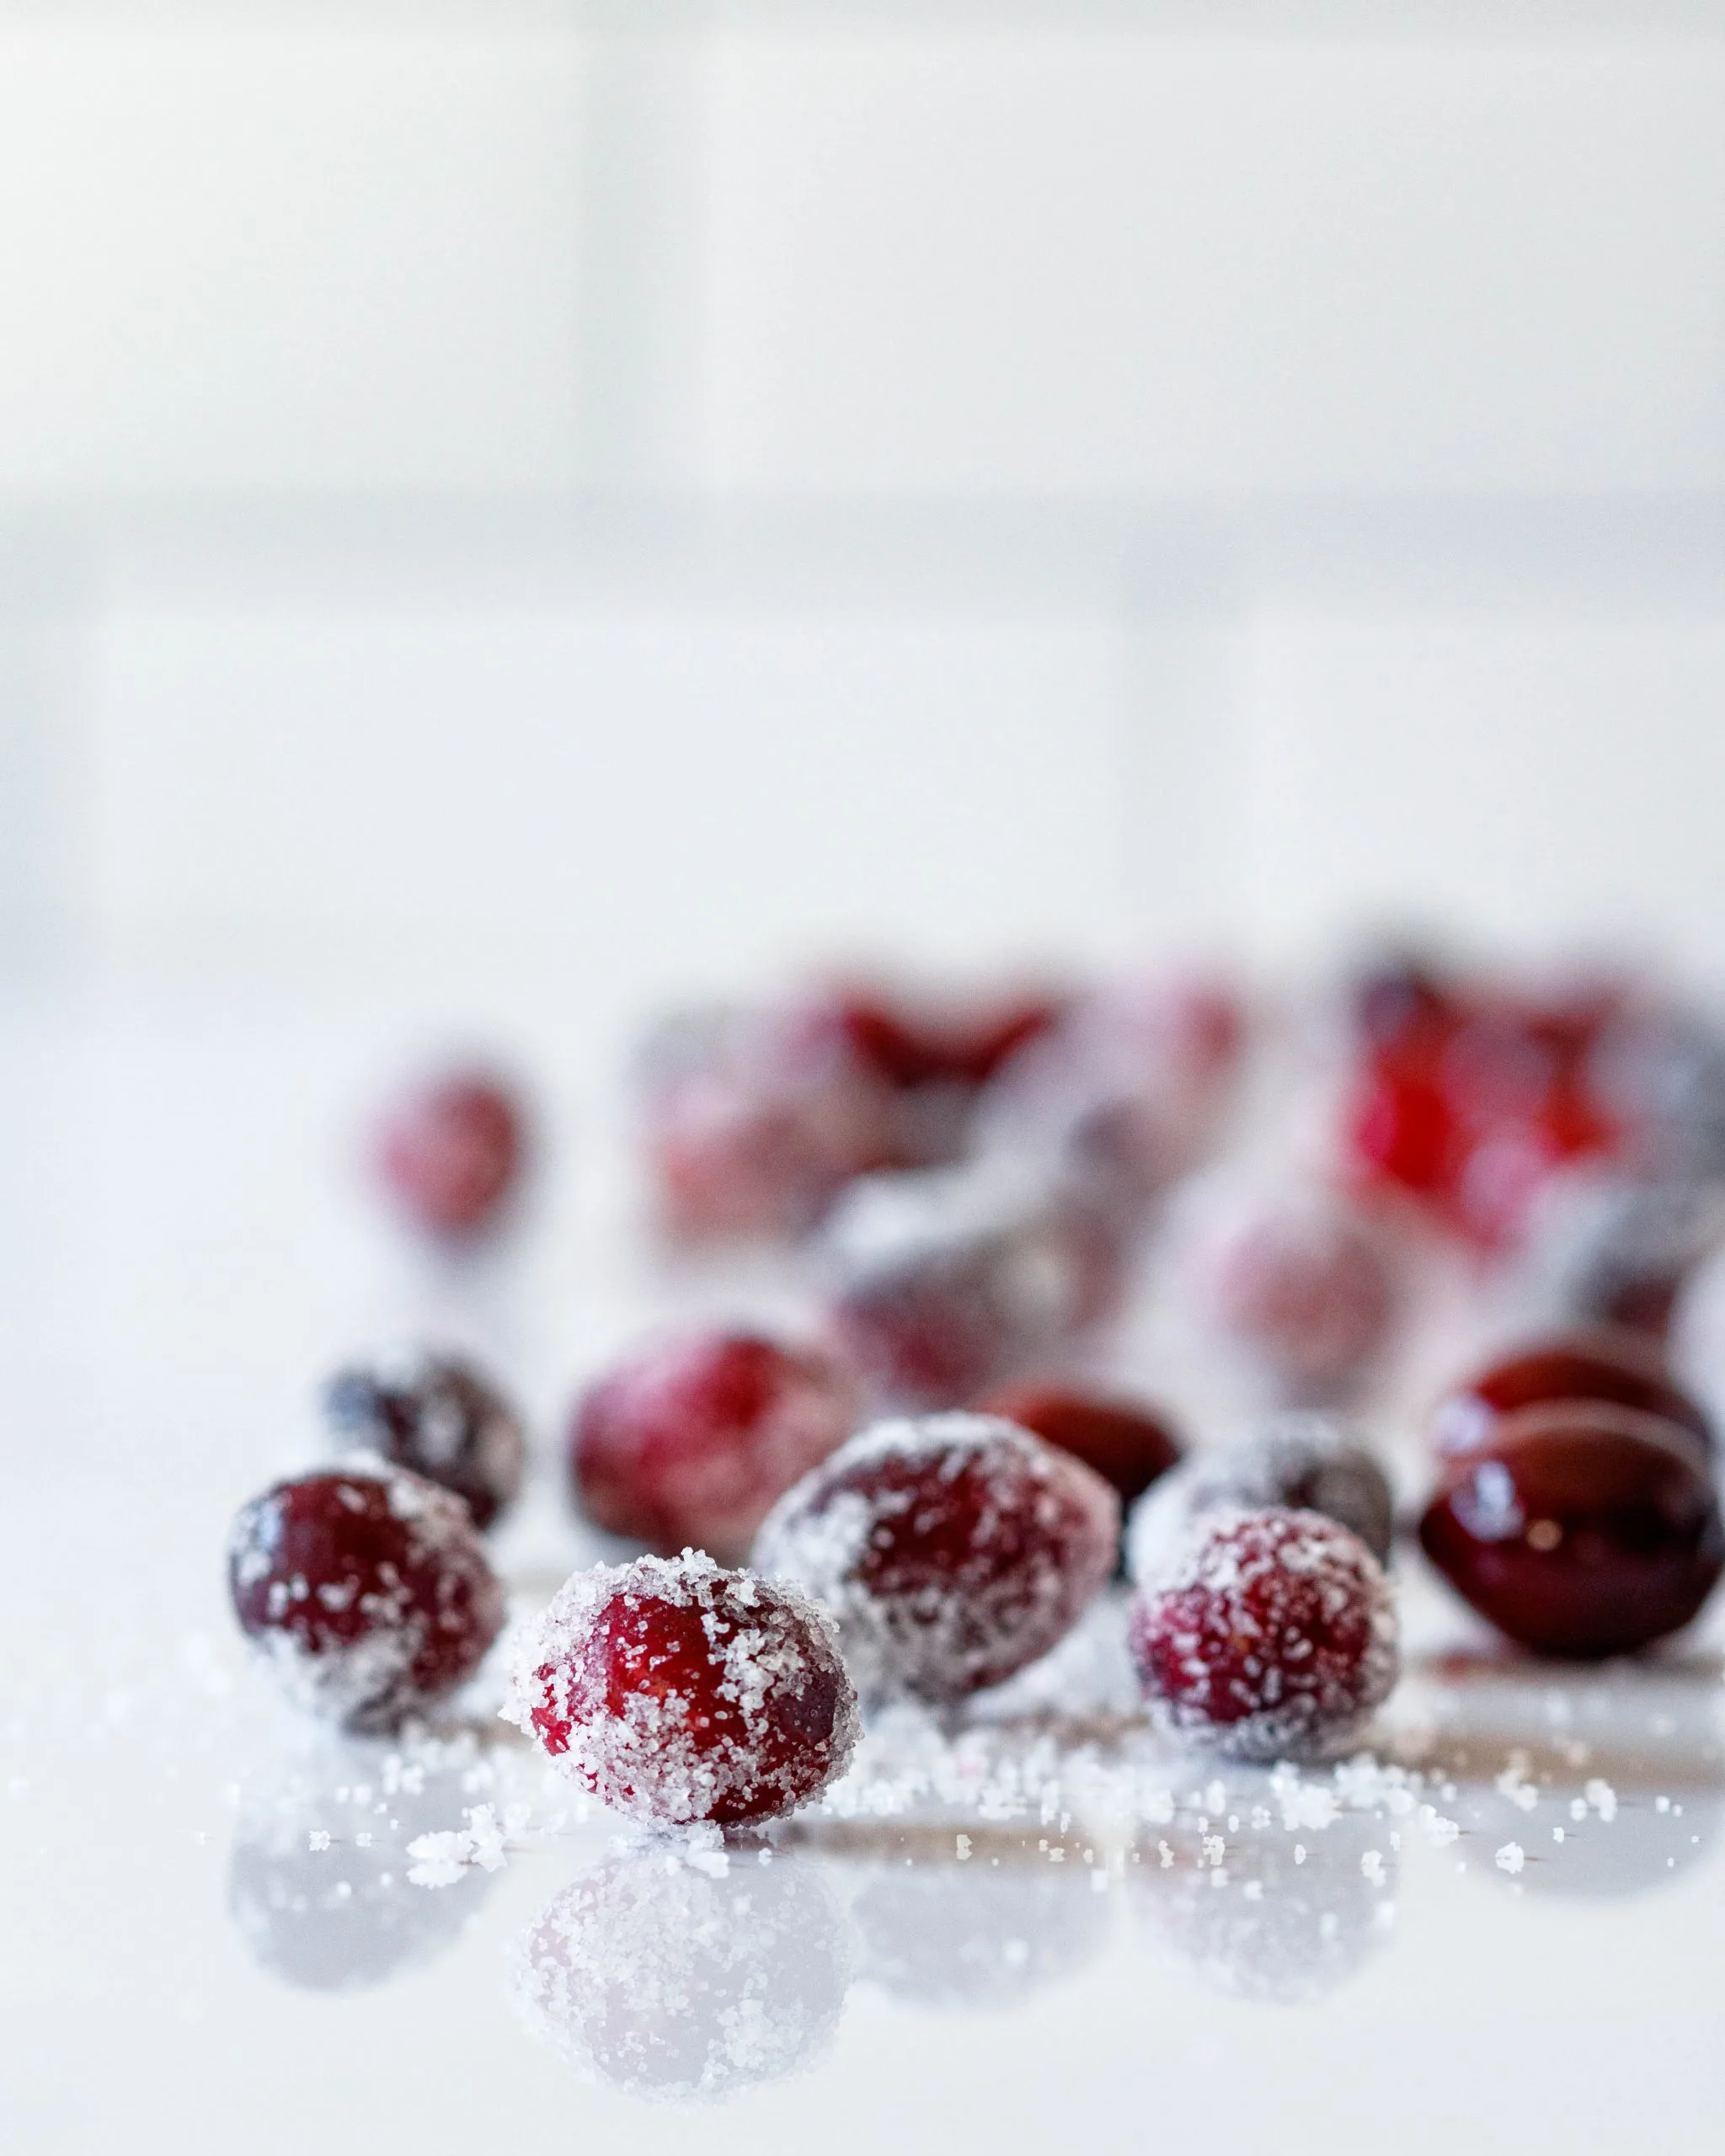 a few scattered cranberries on a white surface - some coated, some uncoated